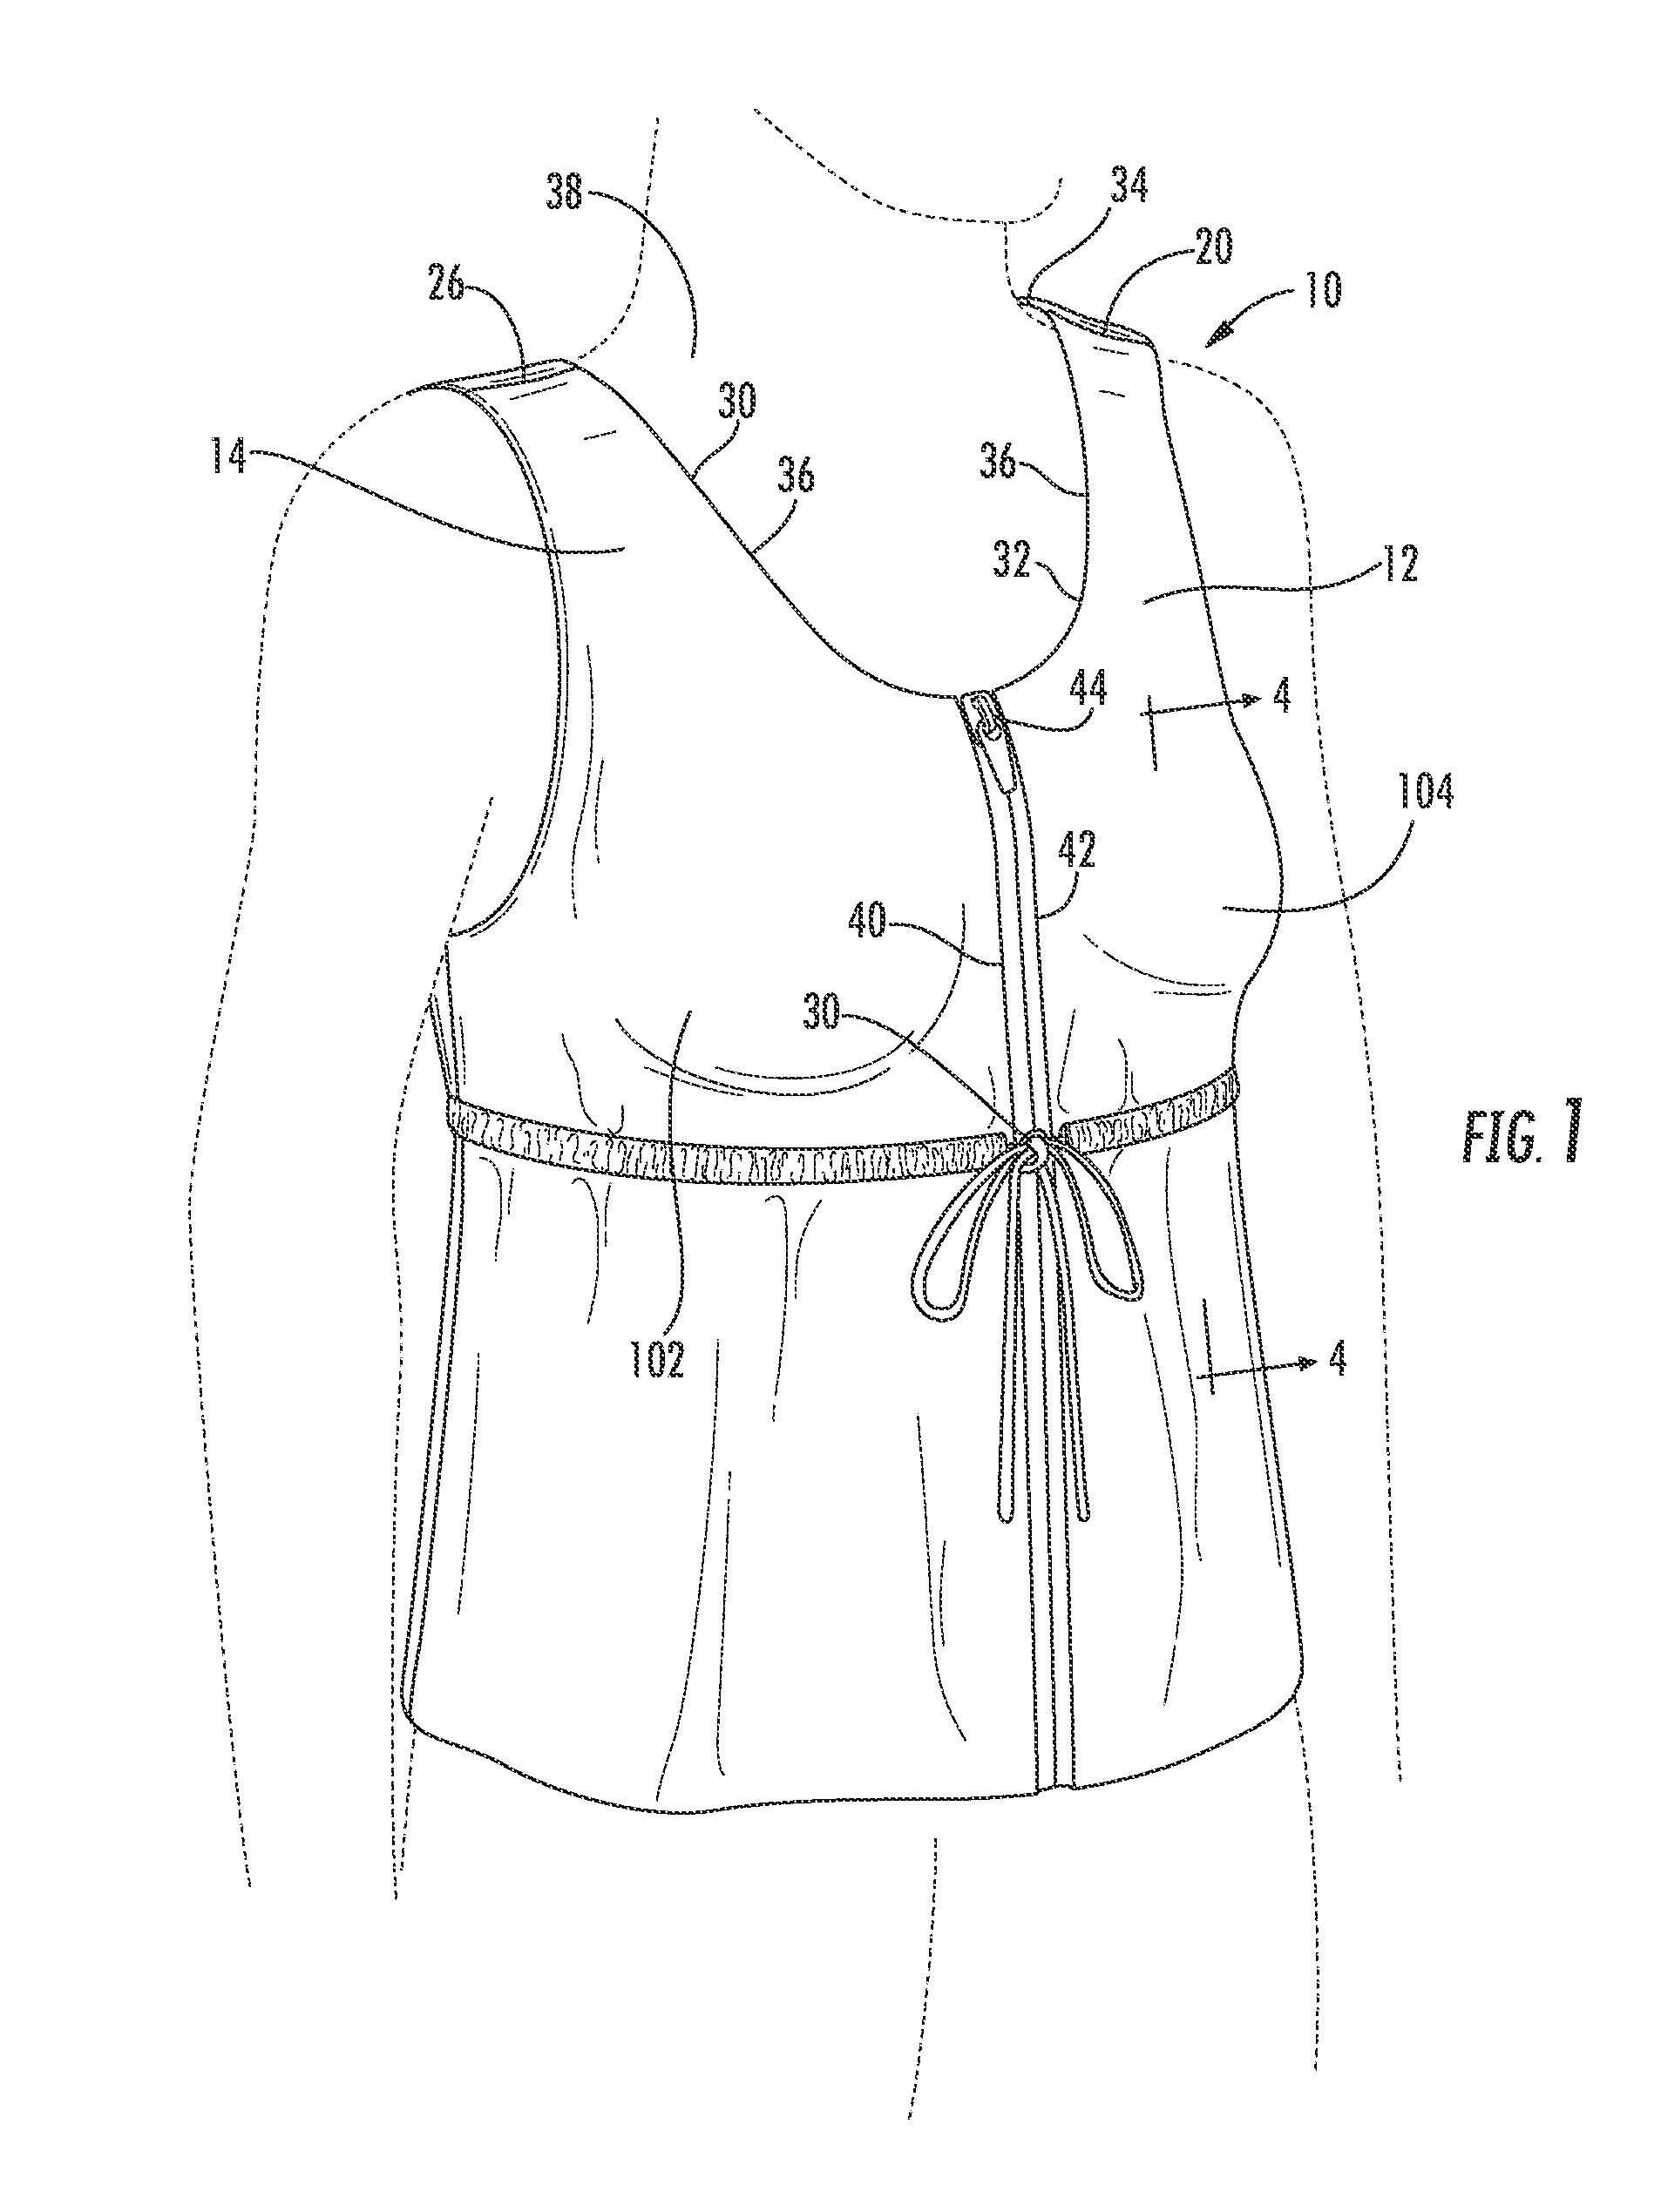 Article of clothing for surgical patients